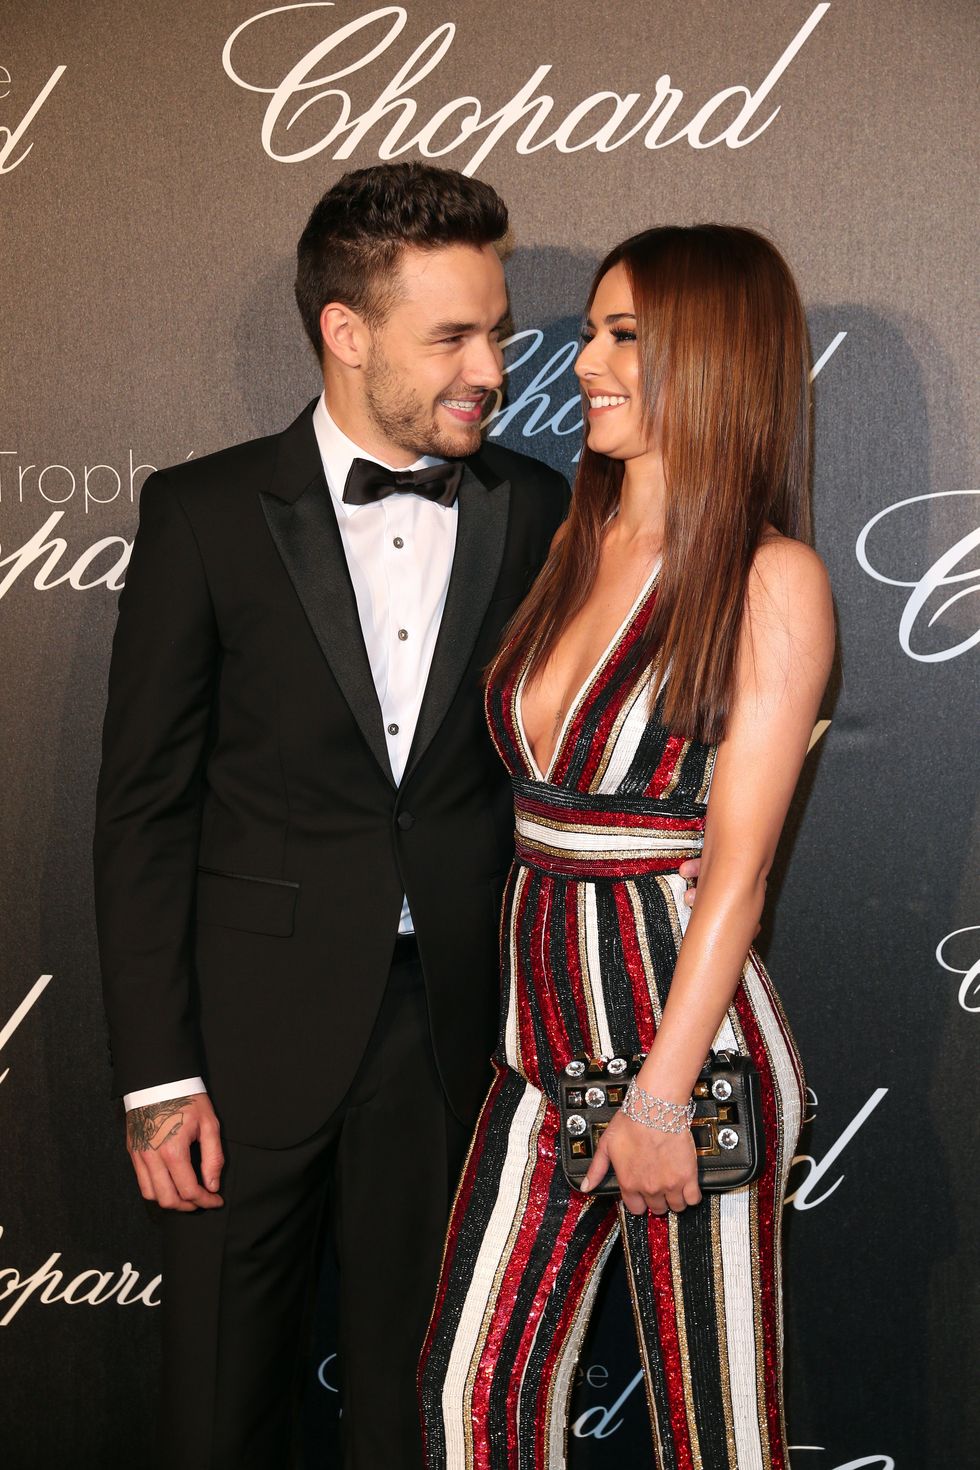 Liam Payne shares first photo of Cheryl amid pregnancy rumours